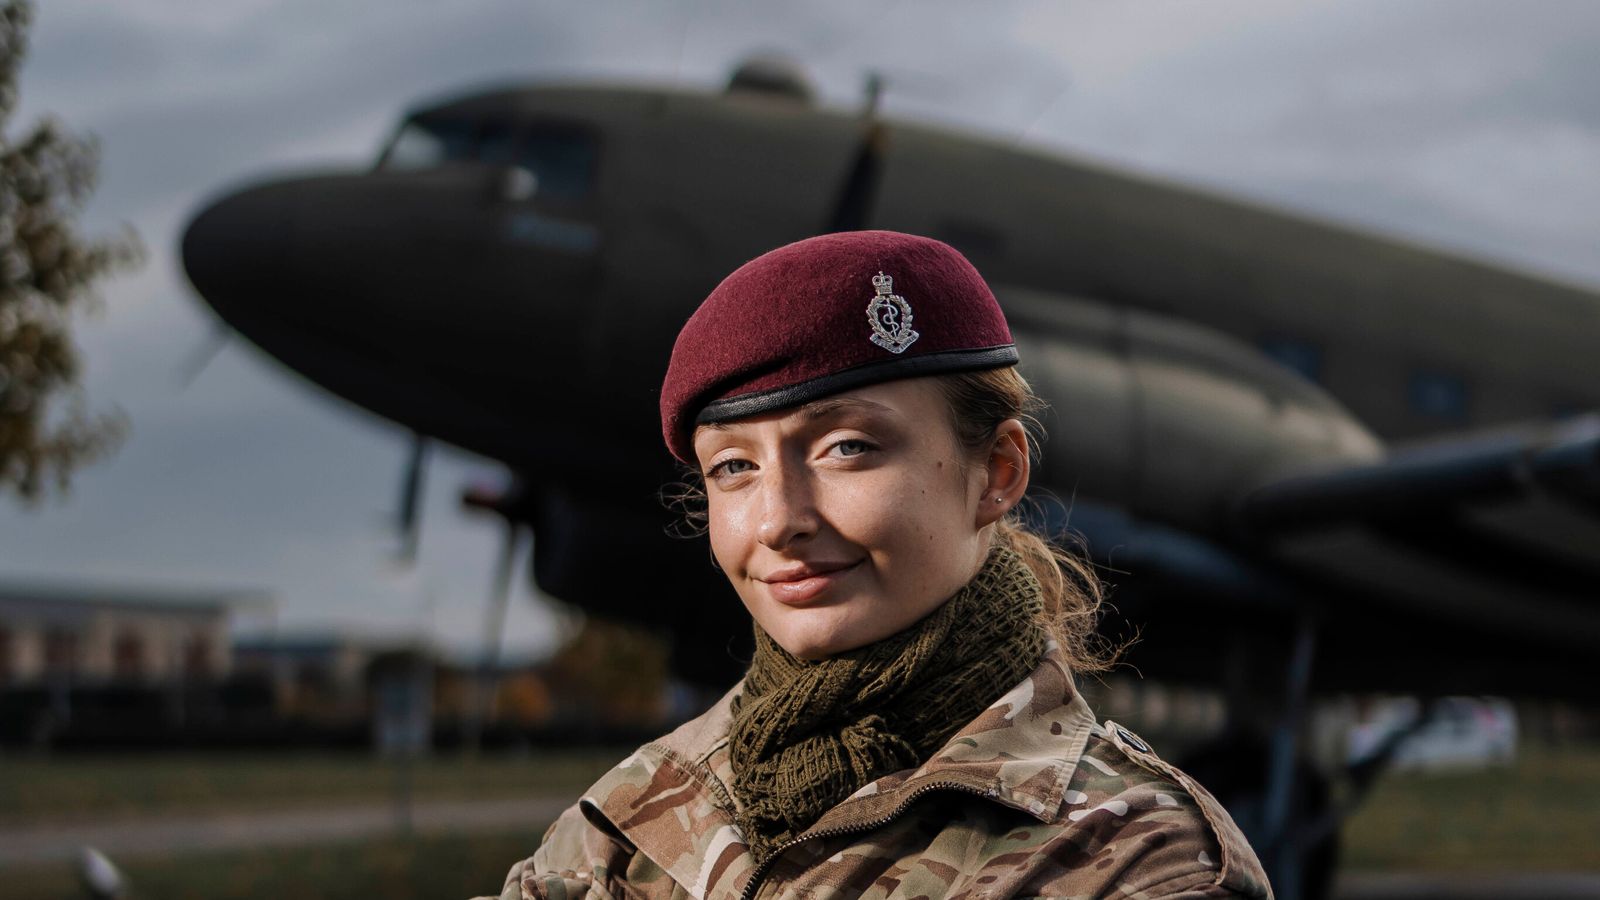 No female soldier had passed this gruelling, three-week Army course - until now